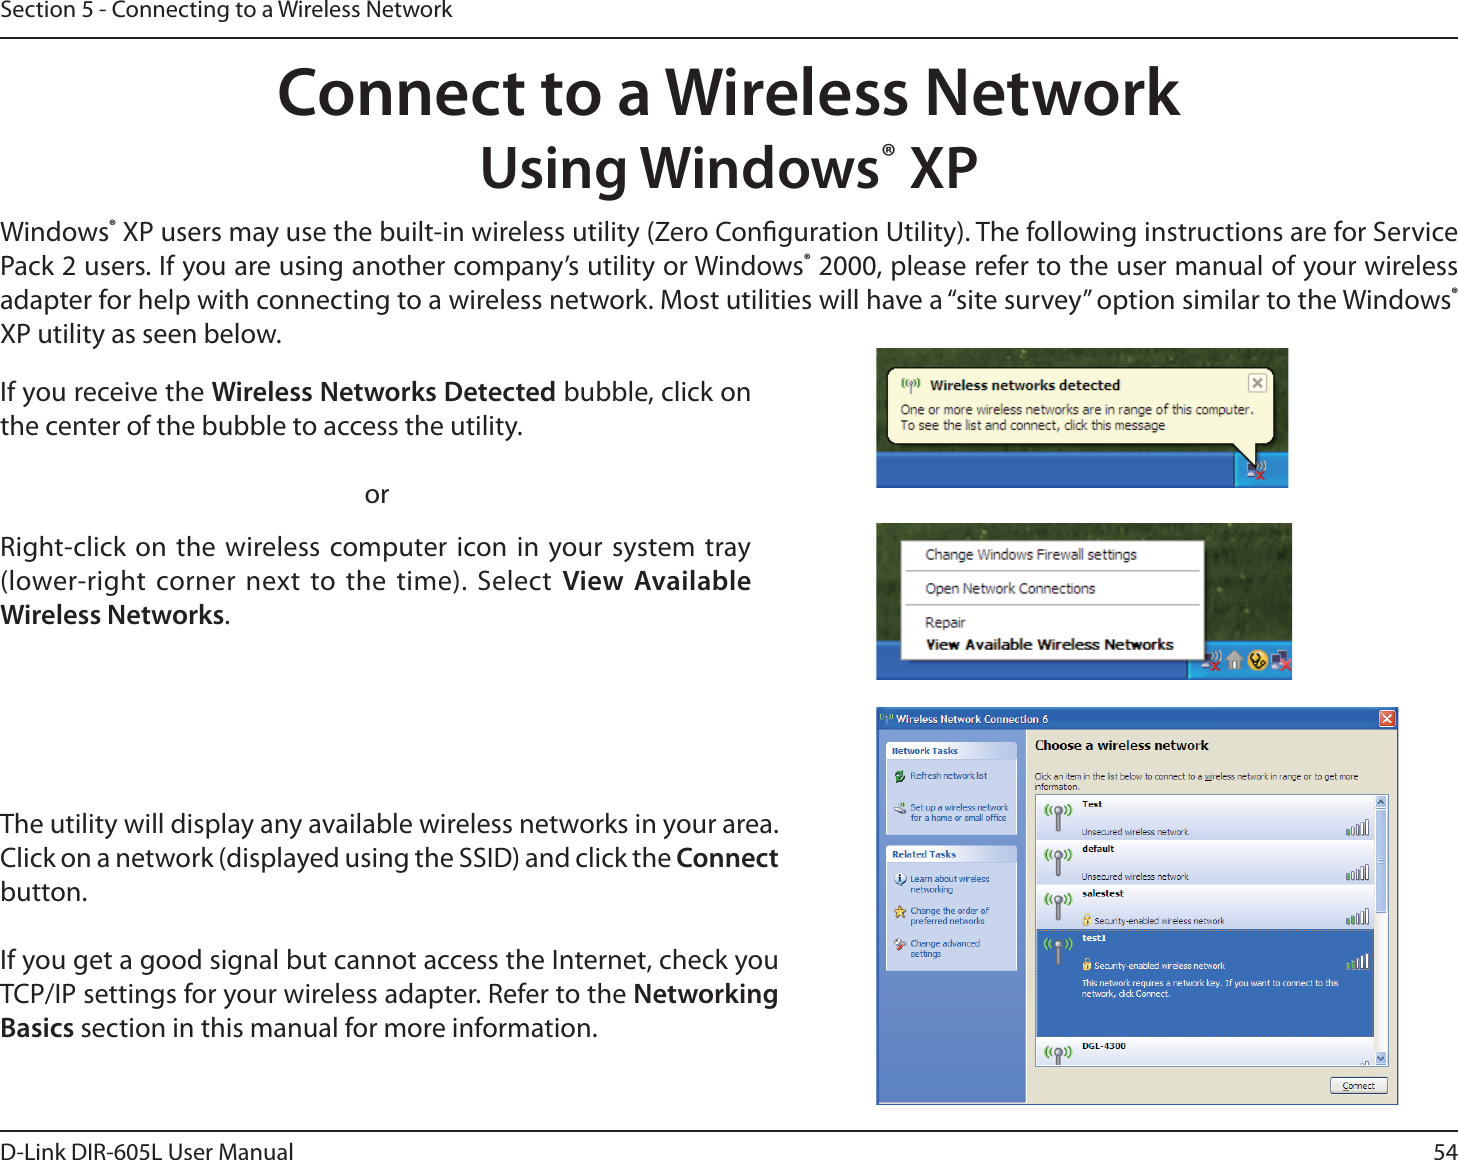 54D-Link DIR-605L User ManualSection 5 - Connecting to a Wireless NetworkConnect to a Wireless NetworkUsing Windows® XPWindows® XP users may use the built-in wireless utility (Zero Conguration Utility). The following instructions are for Service Pack 2 users. If you are using another company’s utility or Windows® 2000, please refer to the user manual of your wireless adapter for help with connecting to a wireless network. Most utilities will have a “site survey” option similar to the Windows® XP utility as seen below.Right-click on the wireless computer icon in your system tray (lower-right corner next to the time). Select View Available Wireless Networks.If you receive the Wireless Networks Detected bubble, click on the center of the bubble to access the utility.     orThe utility will display any available wireless networks in your area. Click on a network (displayed using the SSID) and click the Connect button.If you get a good signal but cannot access the Internet, check you TCP/IP settings for your wireless adapter. Refer to the Networking Basics section in this manual for more information.